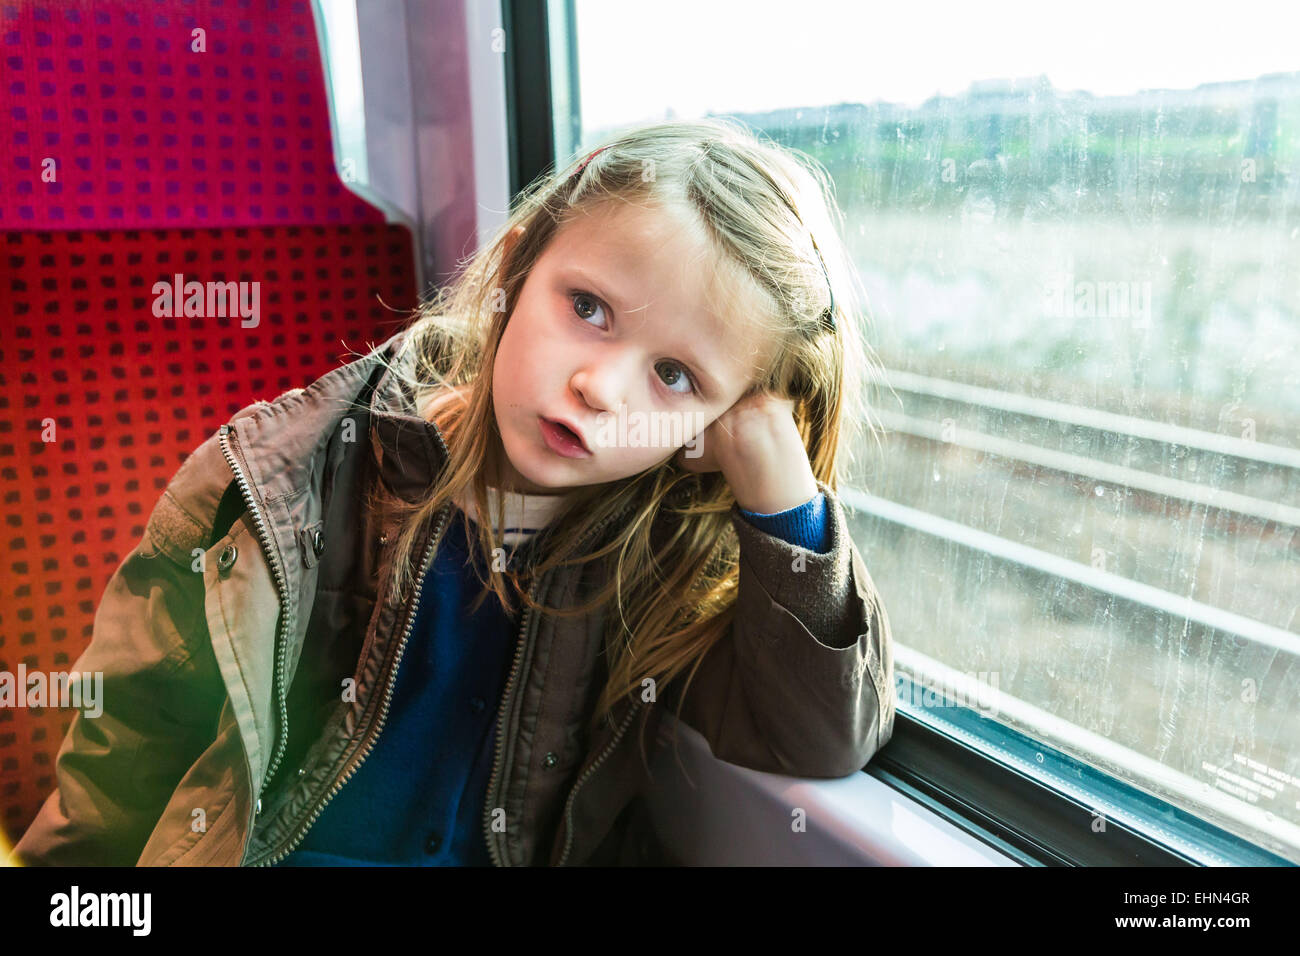 5 year old girl in a train. Stock Photo